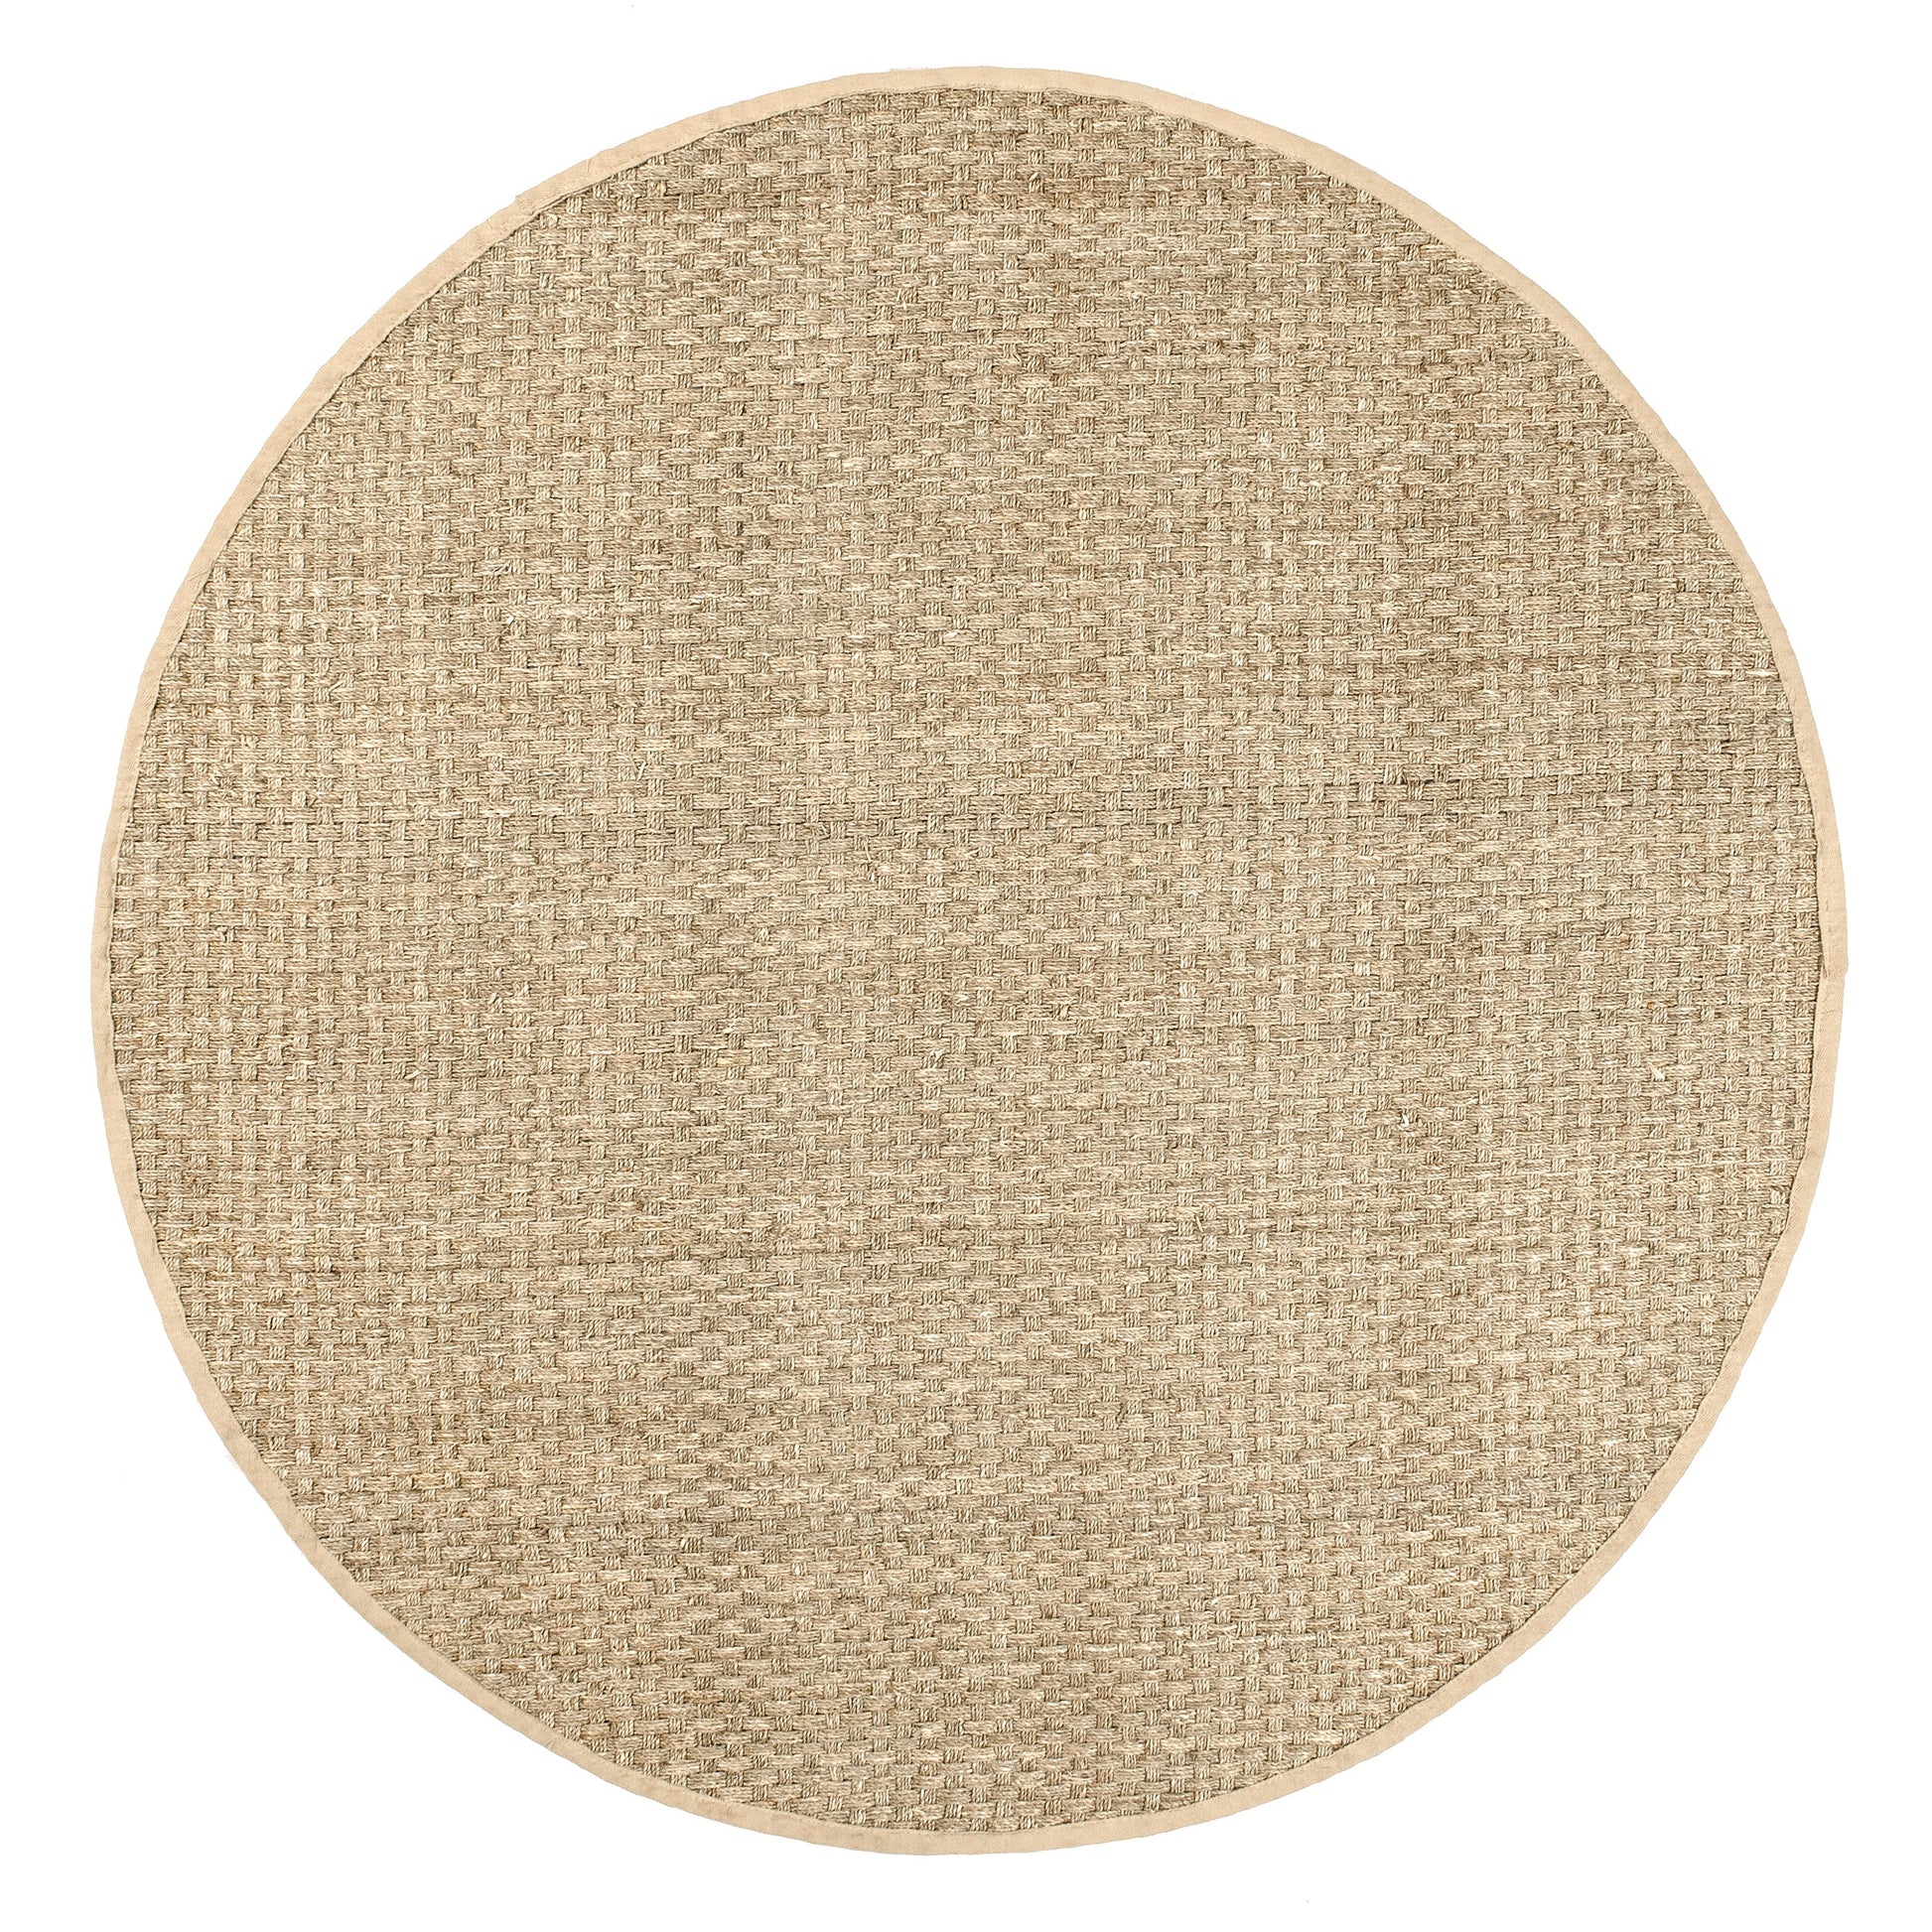 Nuloom Hesse Checker Weave Seagrass Nhe2029D Natural Area Rug